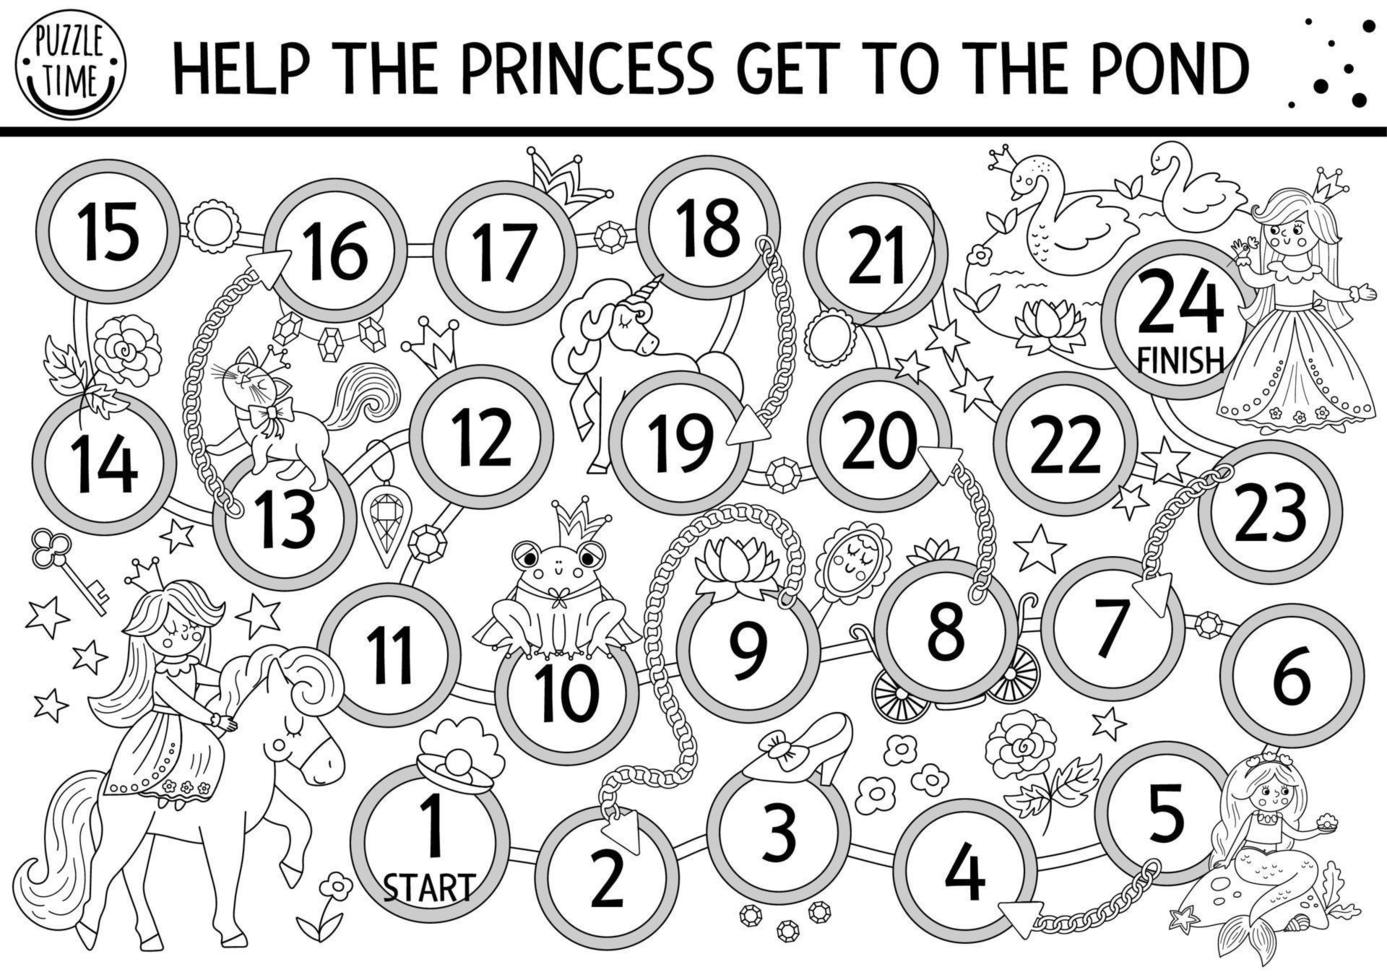 Fairytale black and white dice board game for children with princess, gems, golden chains, unicorn, swans. Magic kingdom line boardgame. Girlish coloring activity or printable worksheet vector